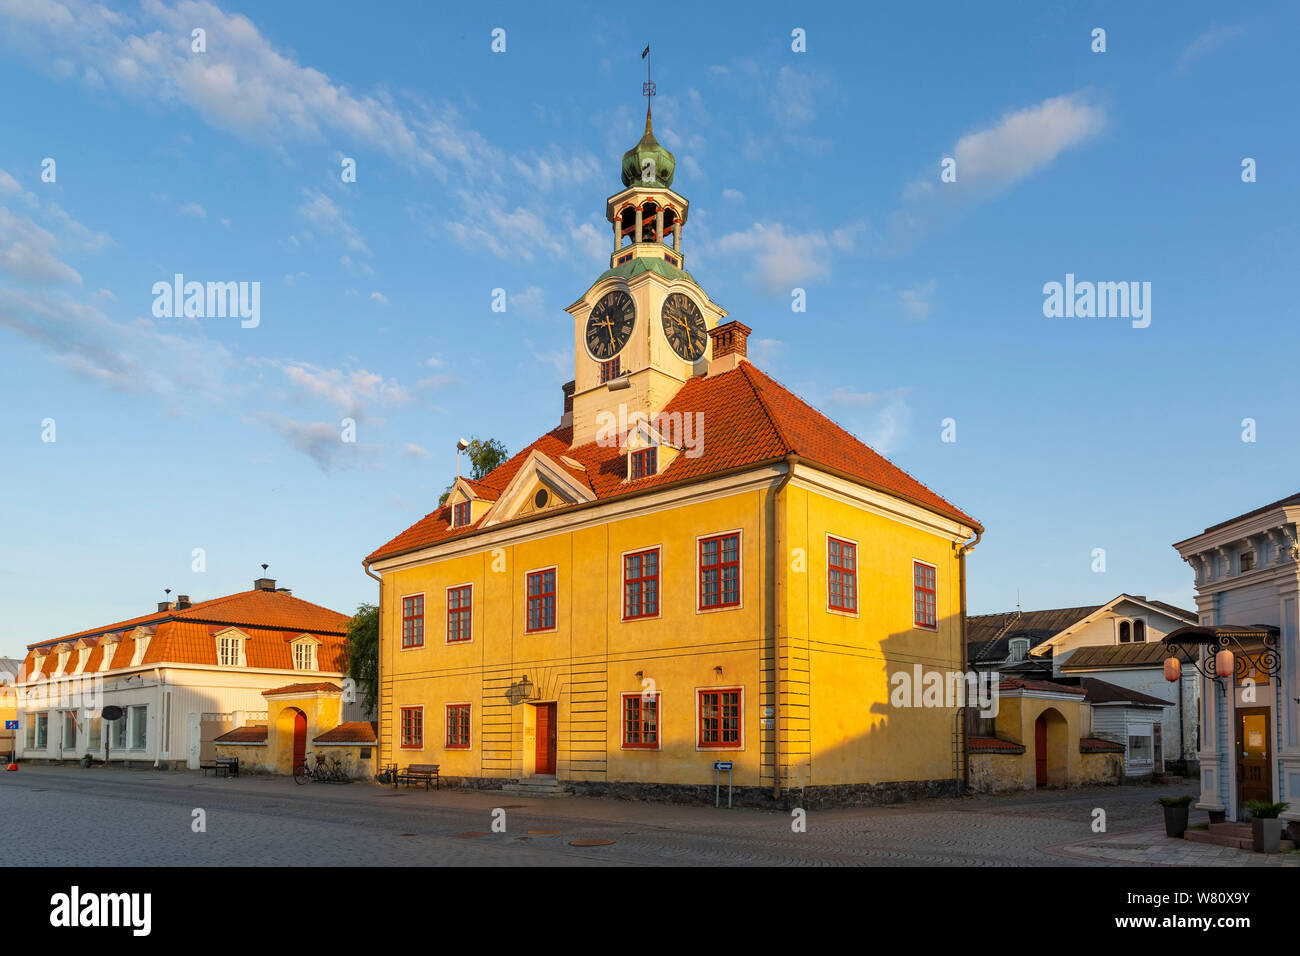 Town hall and well-preserved houses in the wooden city centre of the town of Rauma, Finland Stock Photo